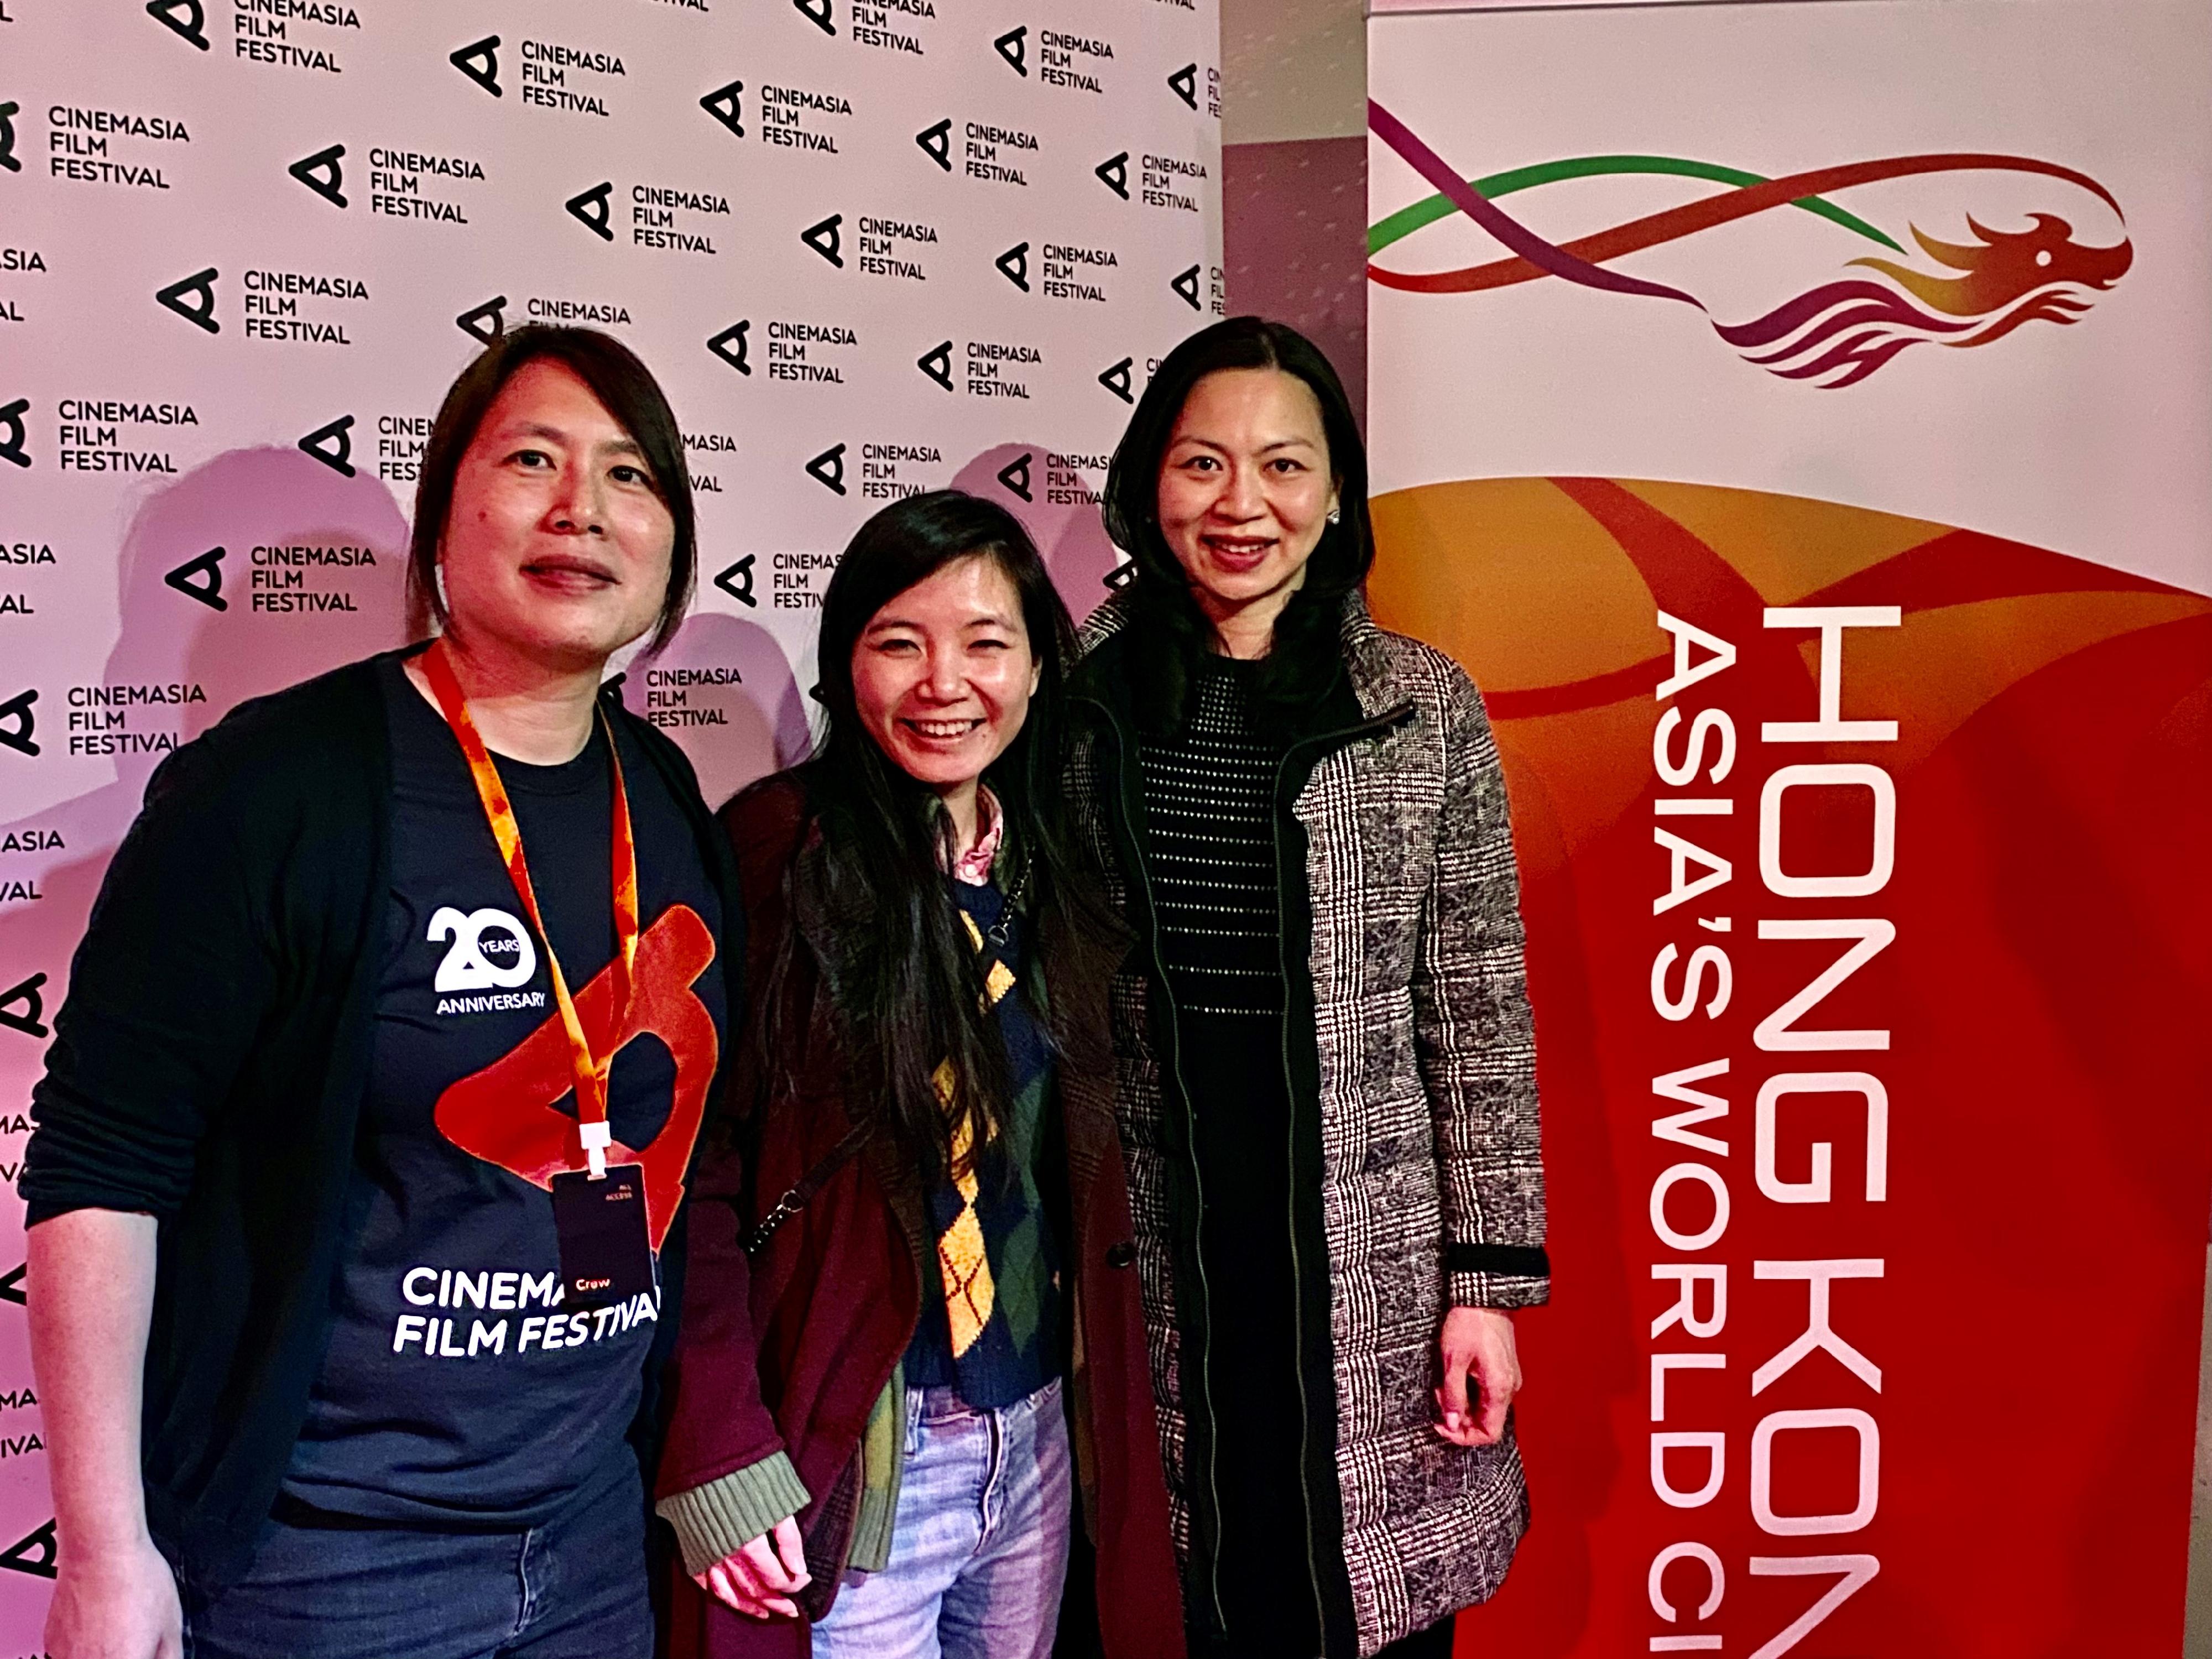 Deputy Representative of the Hong Kong Economic and Trade Office in Brussels Miss Fiona Li (right); young film talent from Hong Kong Mo Lai (centre), and the Executive Director of the CinemAsia Film Festival, Ms Doris Yeung (left), are pictured at the Hong Kong film night reception held on March 9 in Amsterdam, the Netherlands.